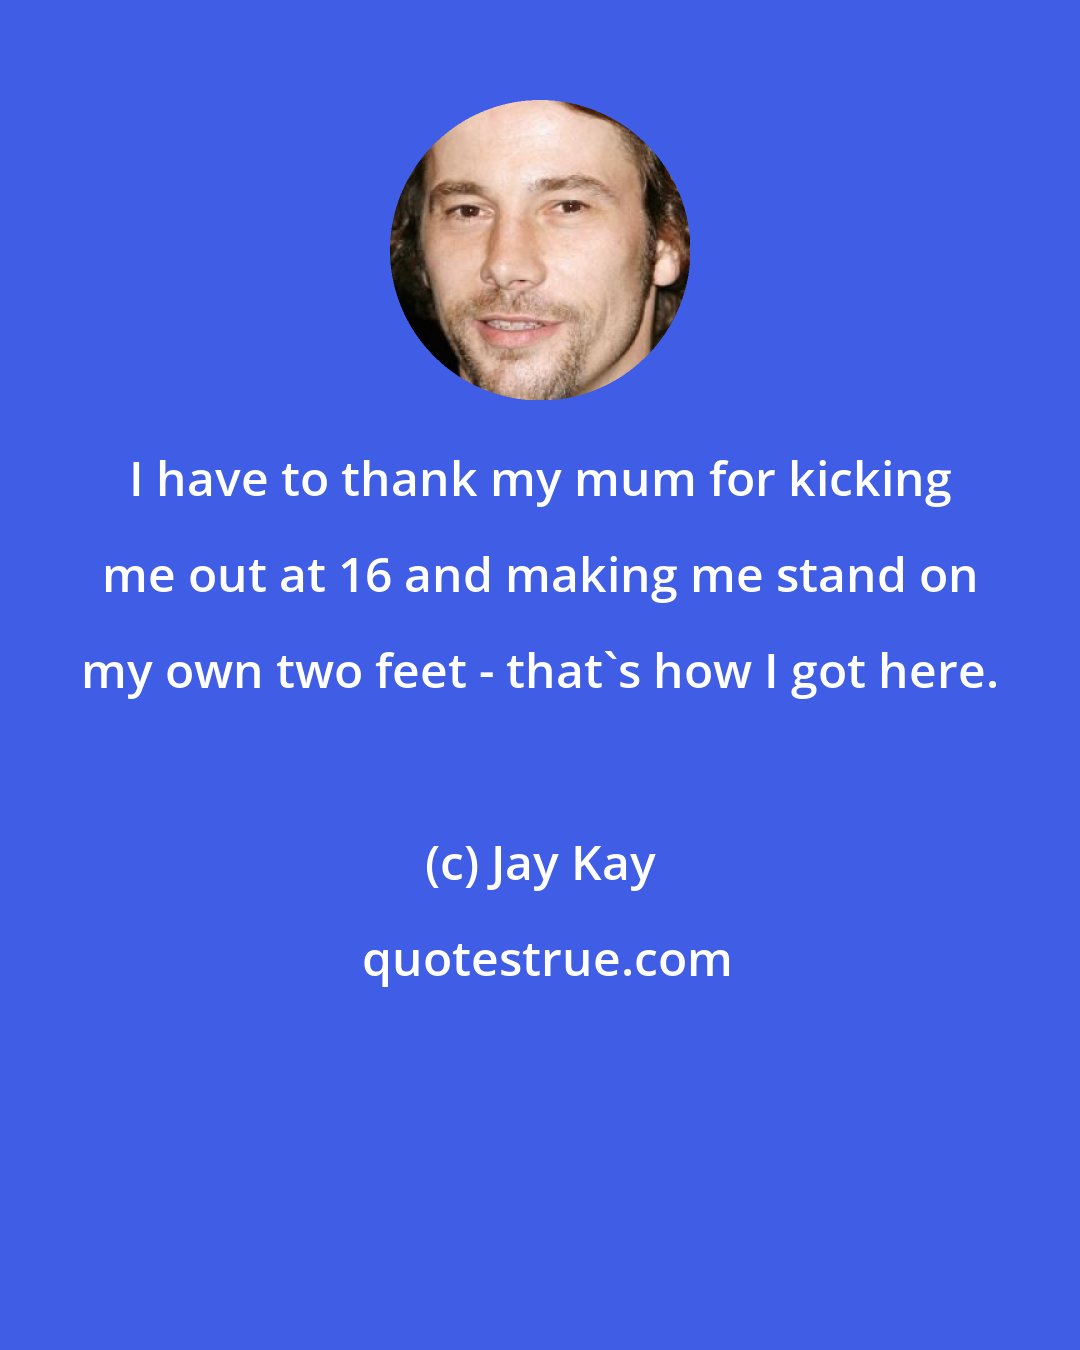 Jay Kay: I have to thank my mum for kicking me out at 16 and making me stand on my own two feet - that's how I got here.